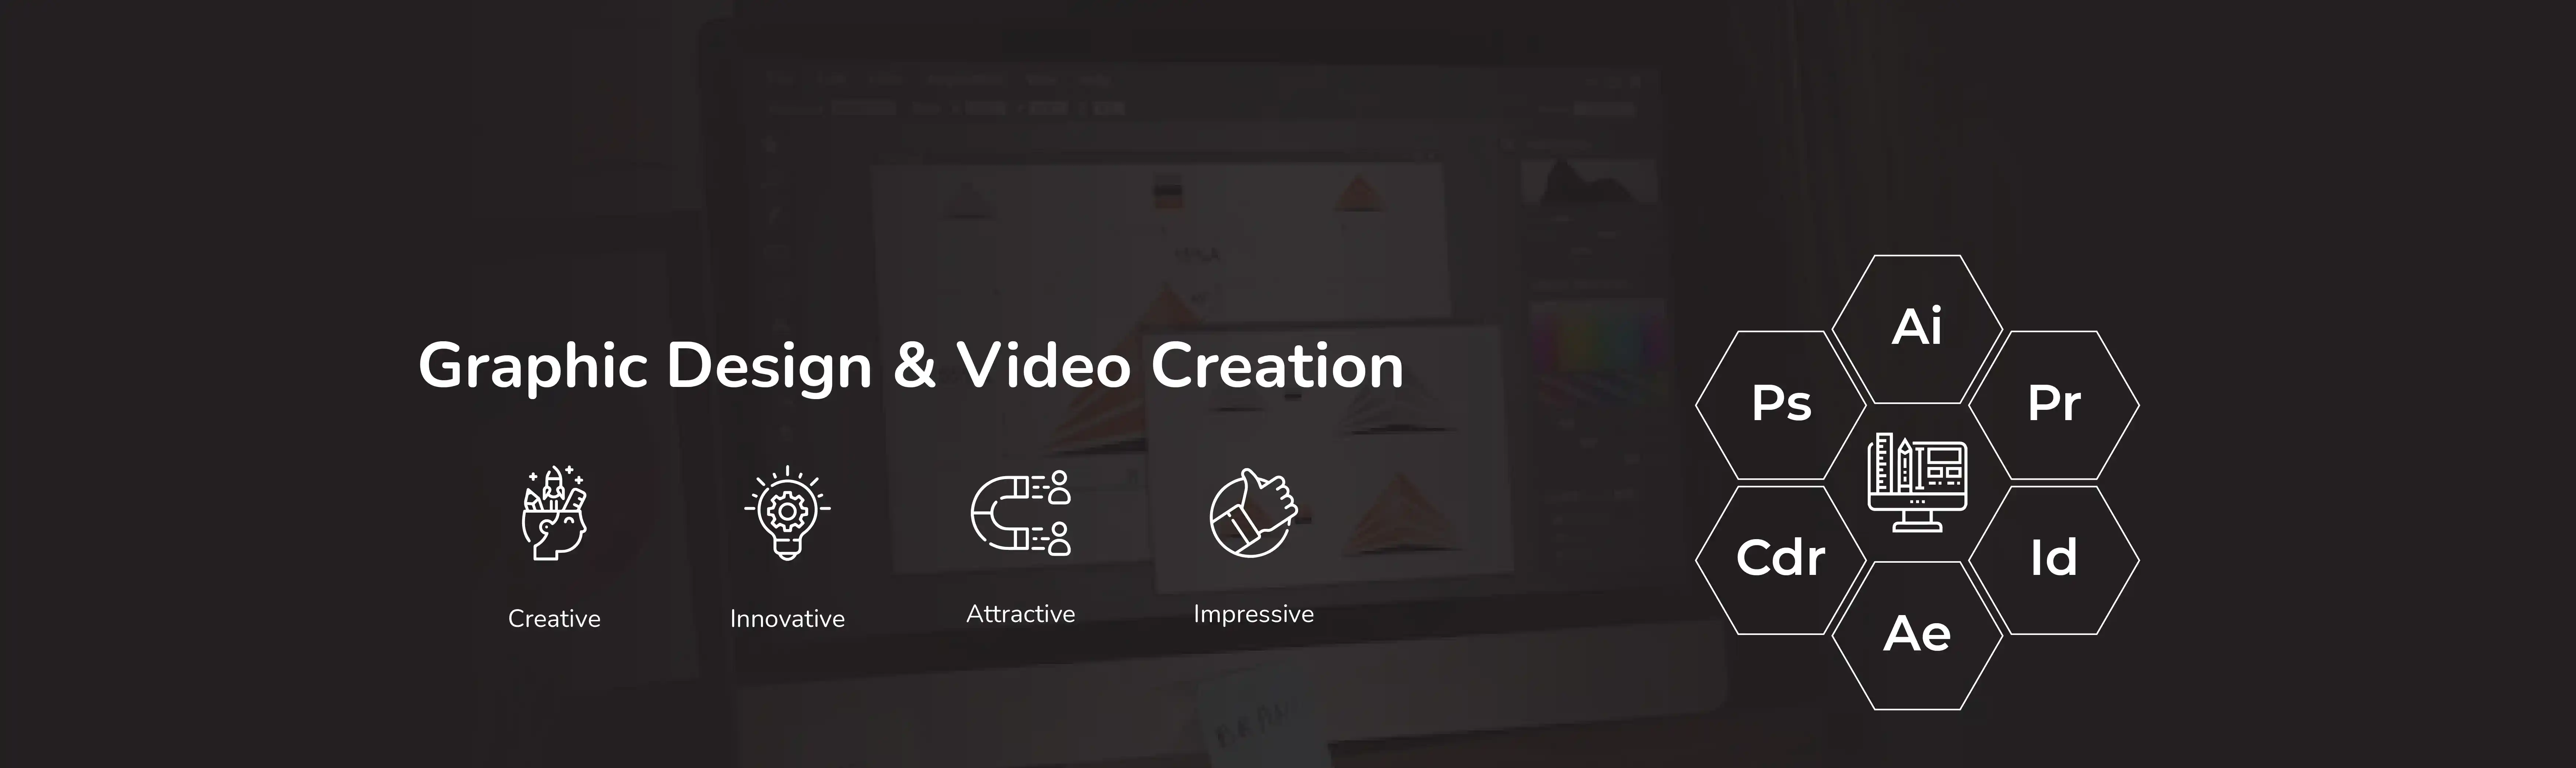 graphic design video creation home-banner